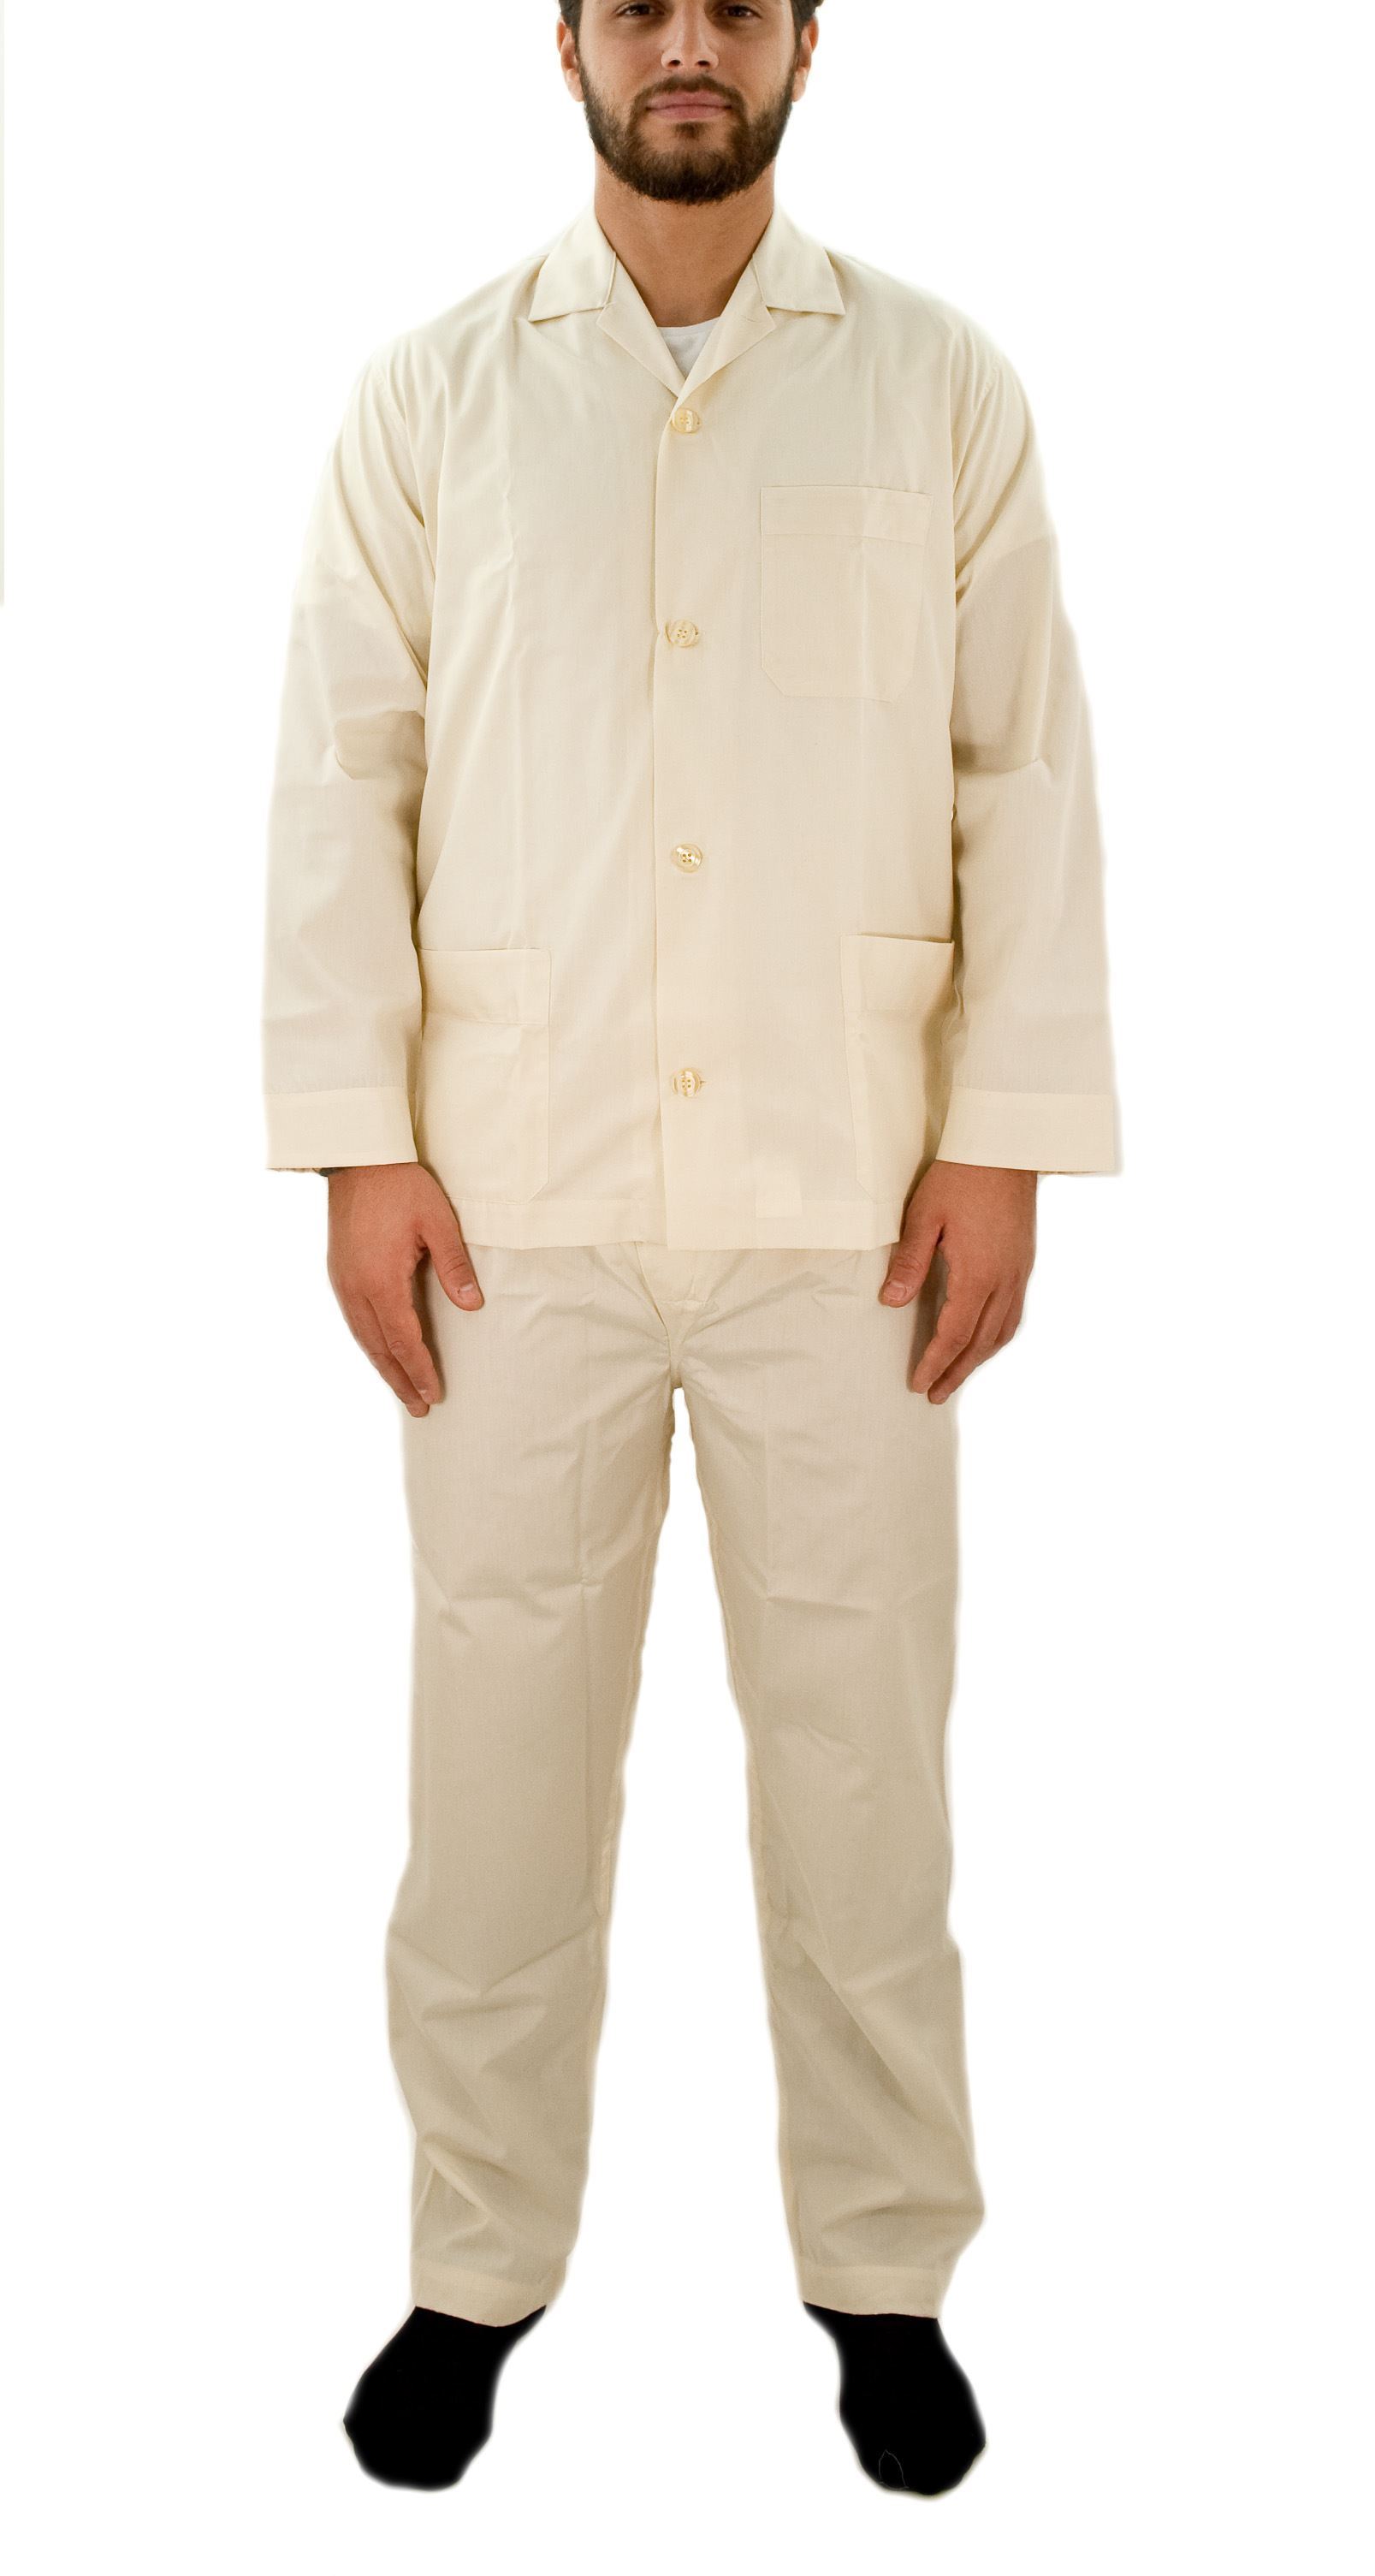 Picture of Buttoned men's pajamas